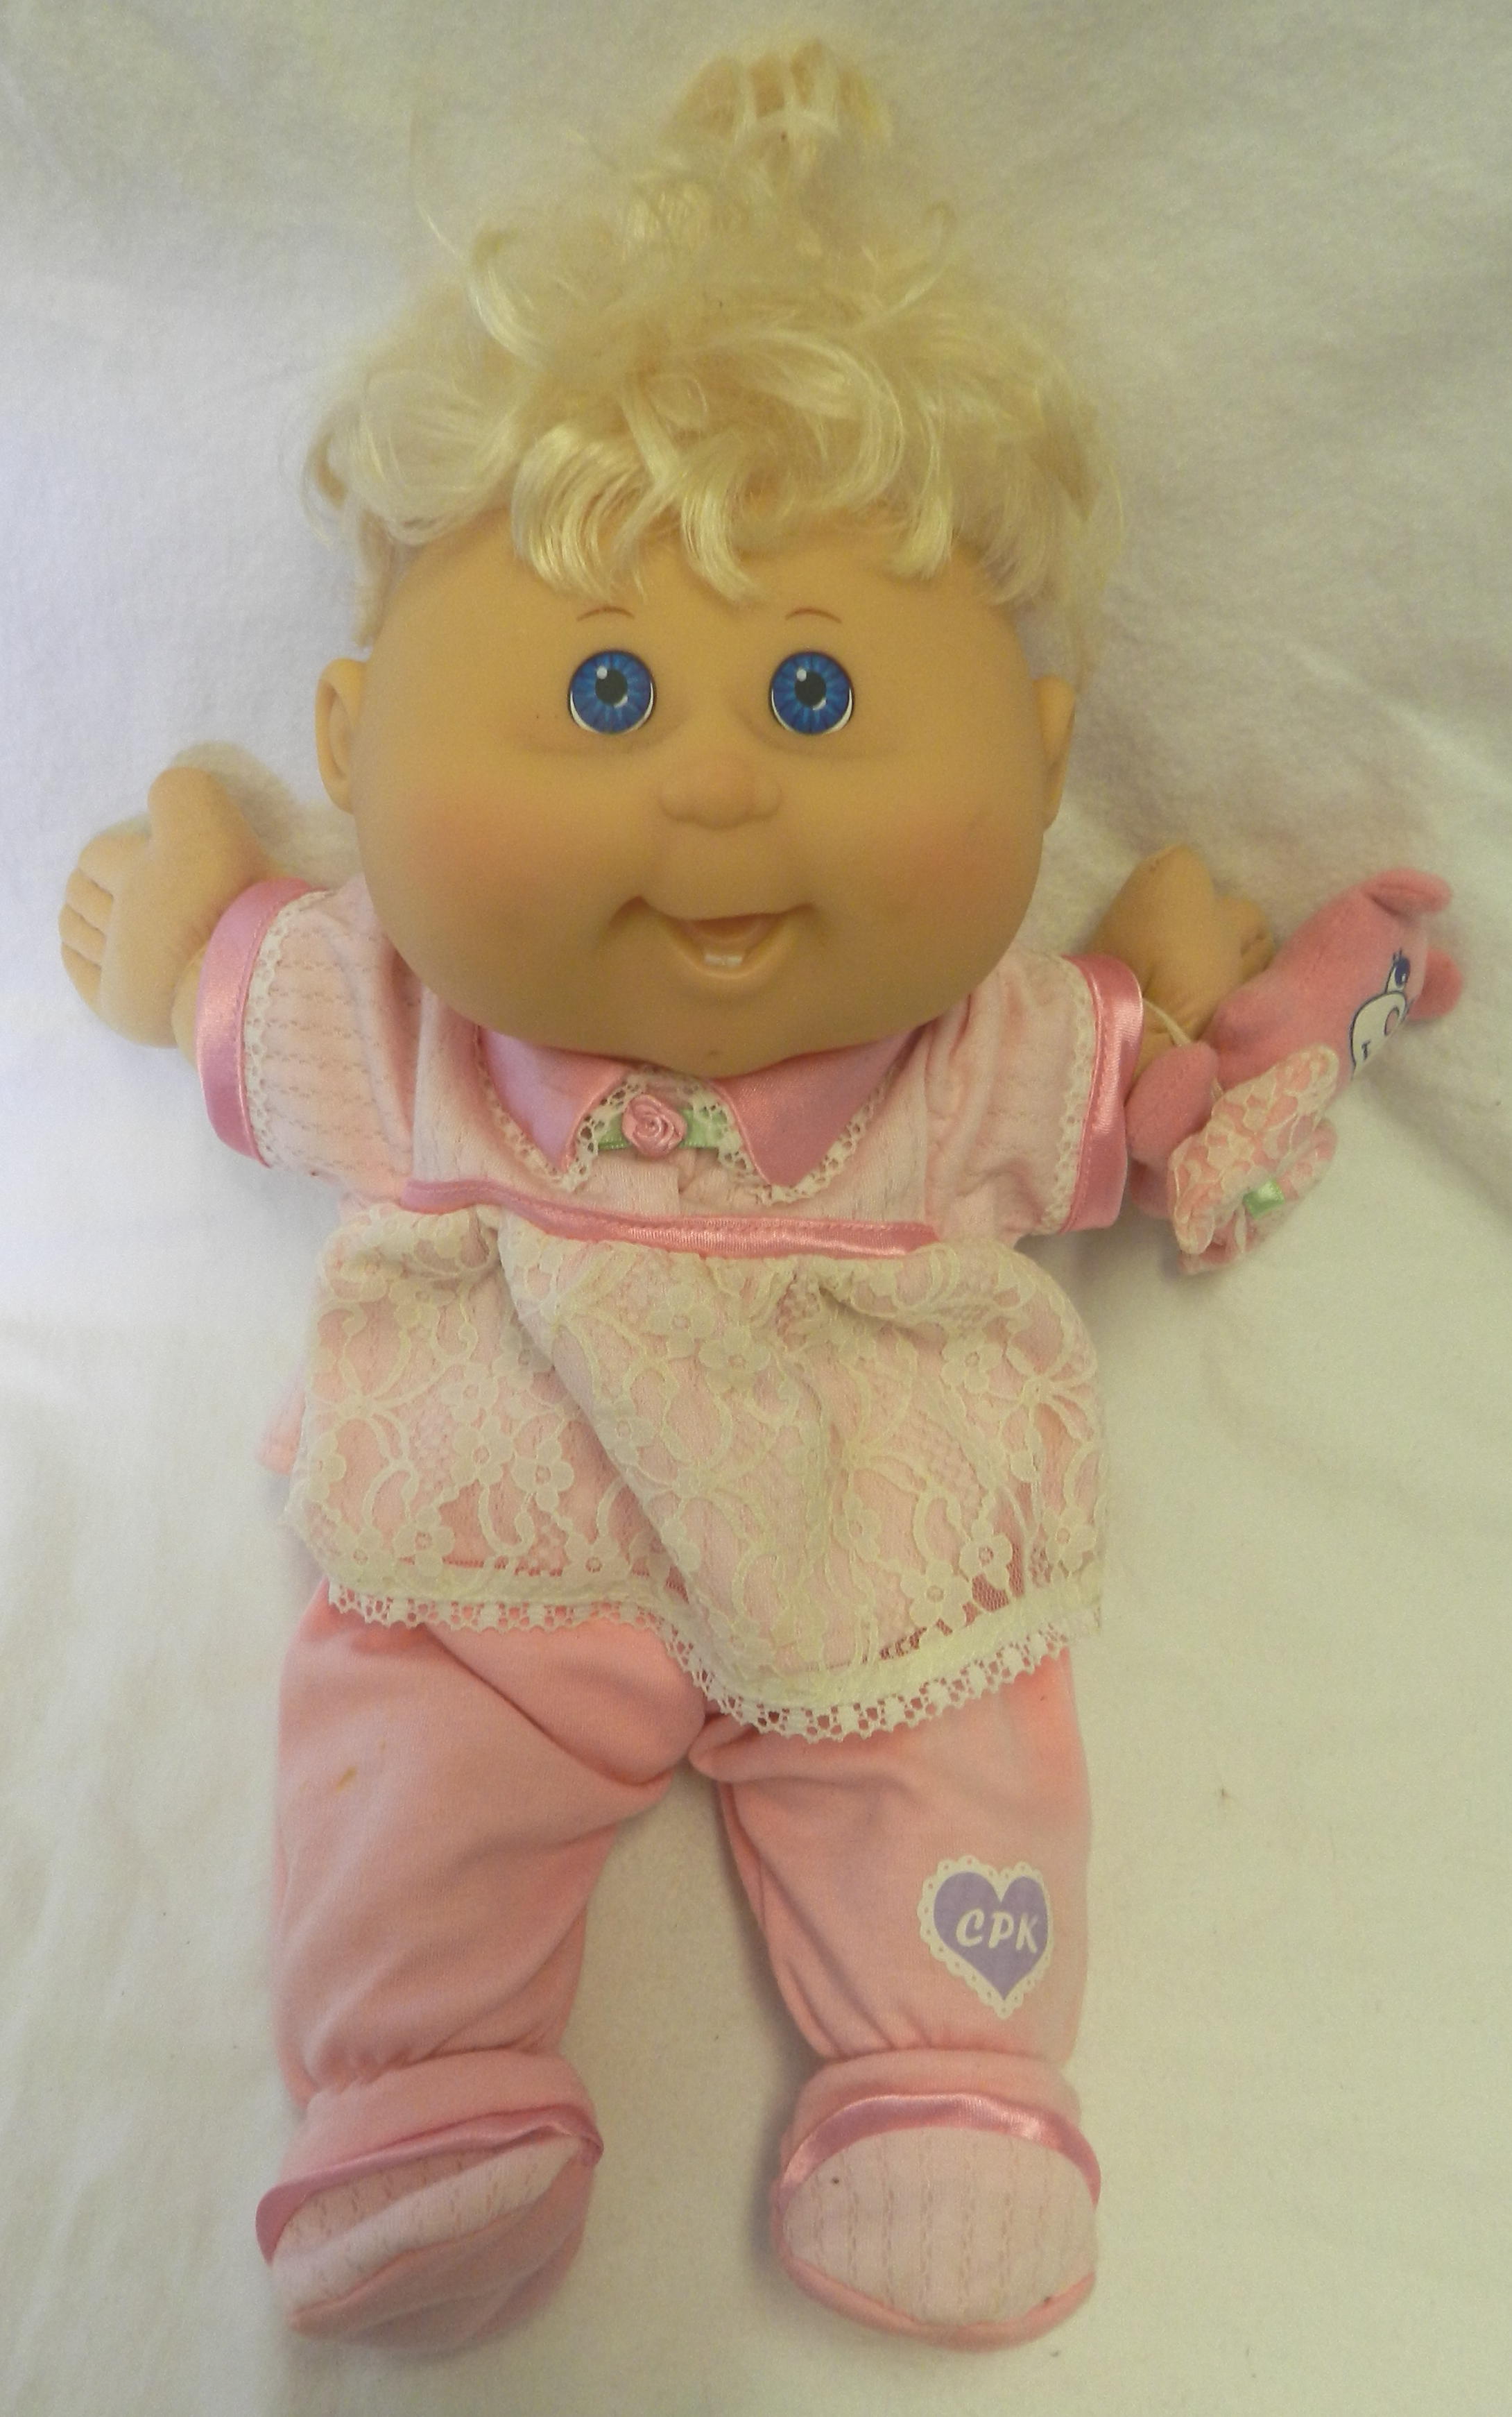 Plain Cabbage Patch Doll